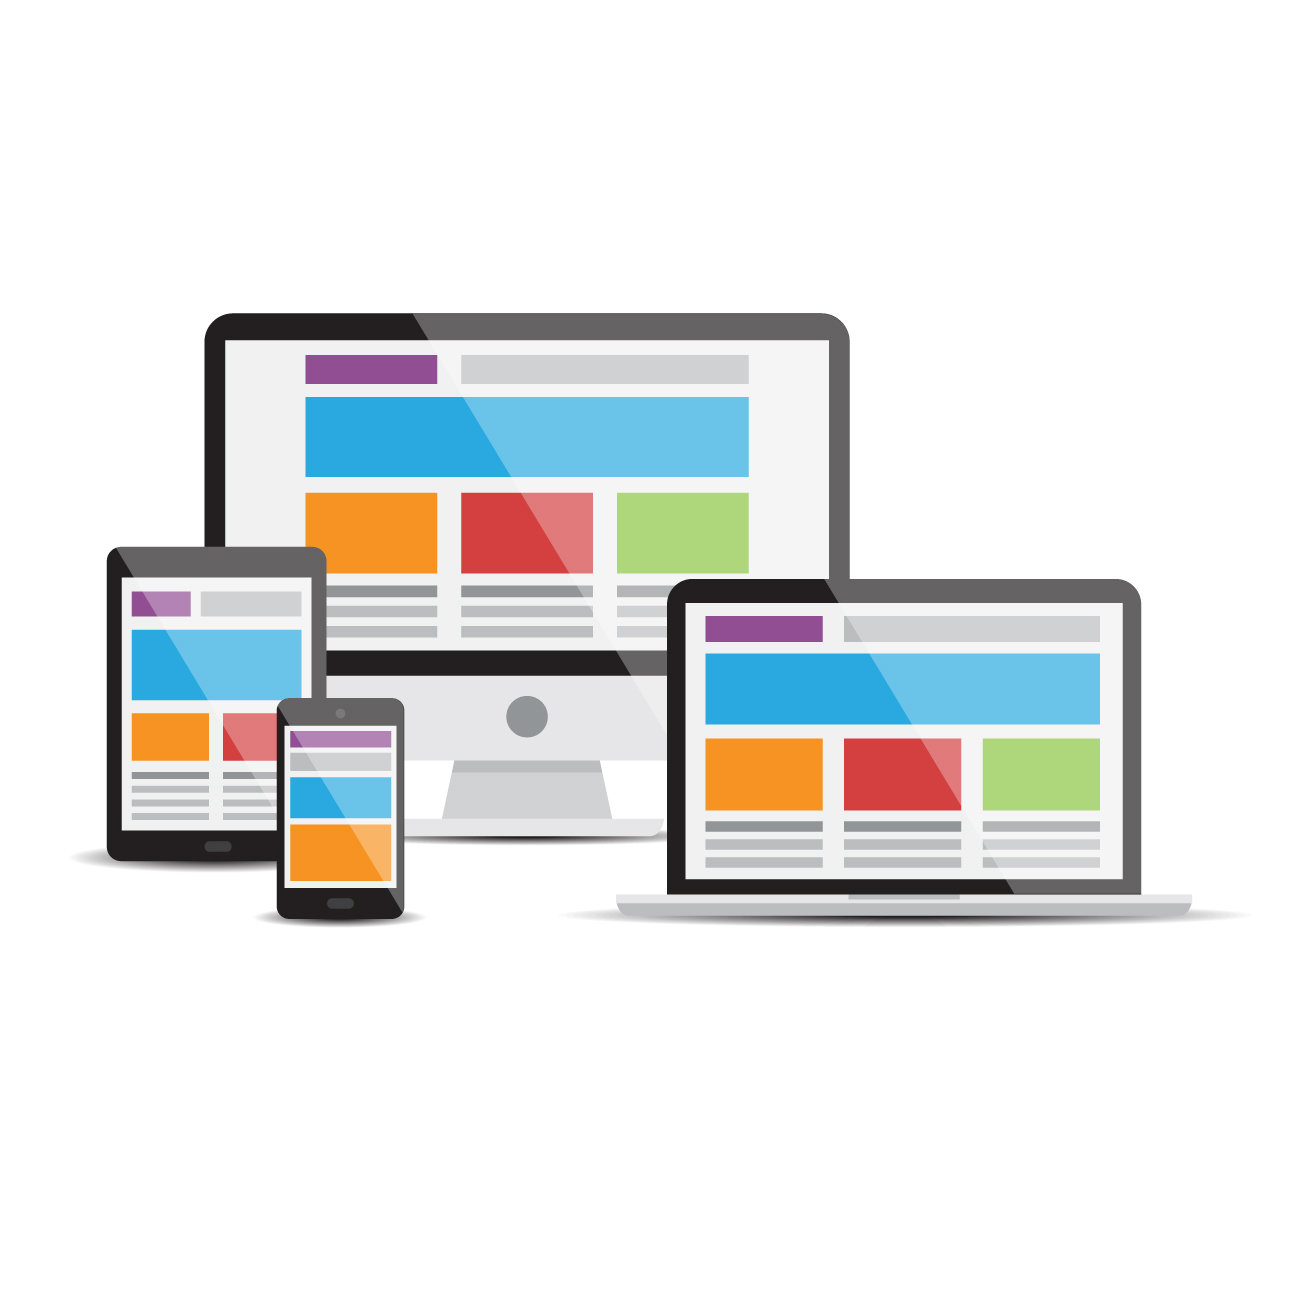 WHY RESPONSIVE WEBSITE DESIGN IS HERE TO STAY?